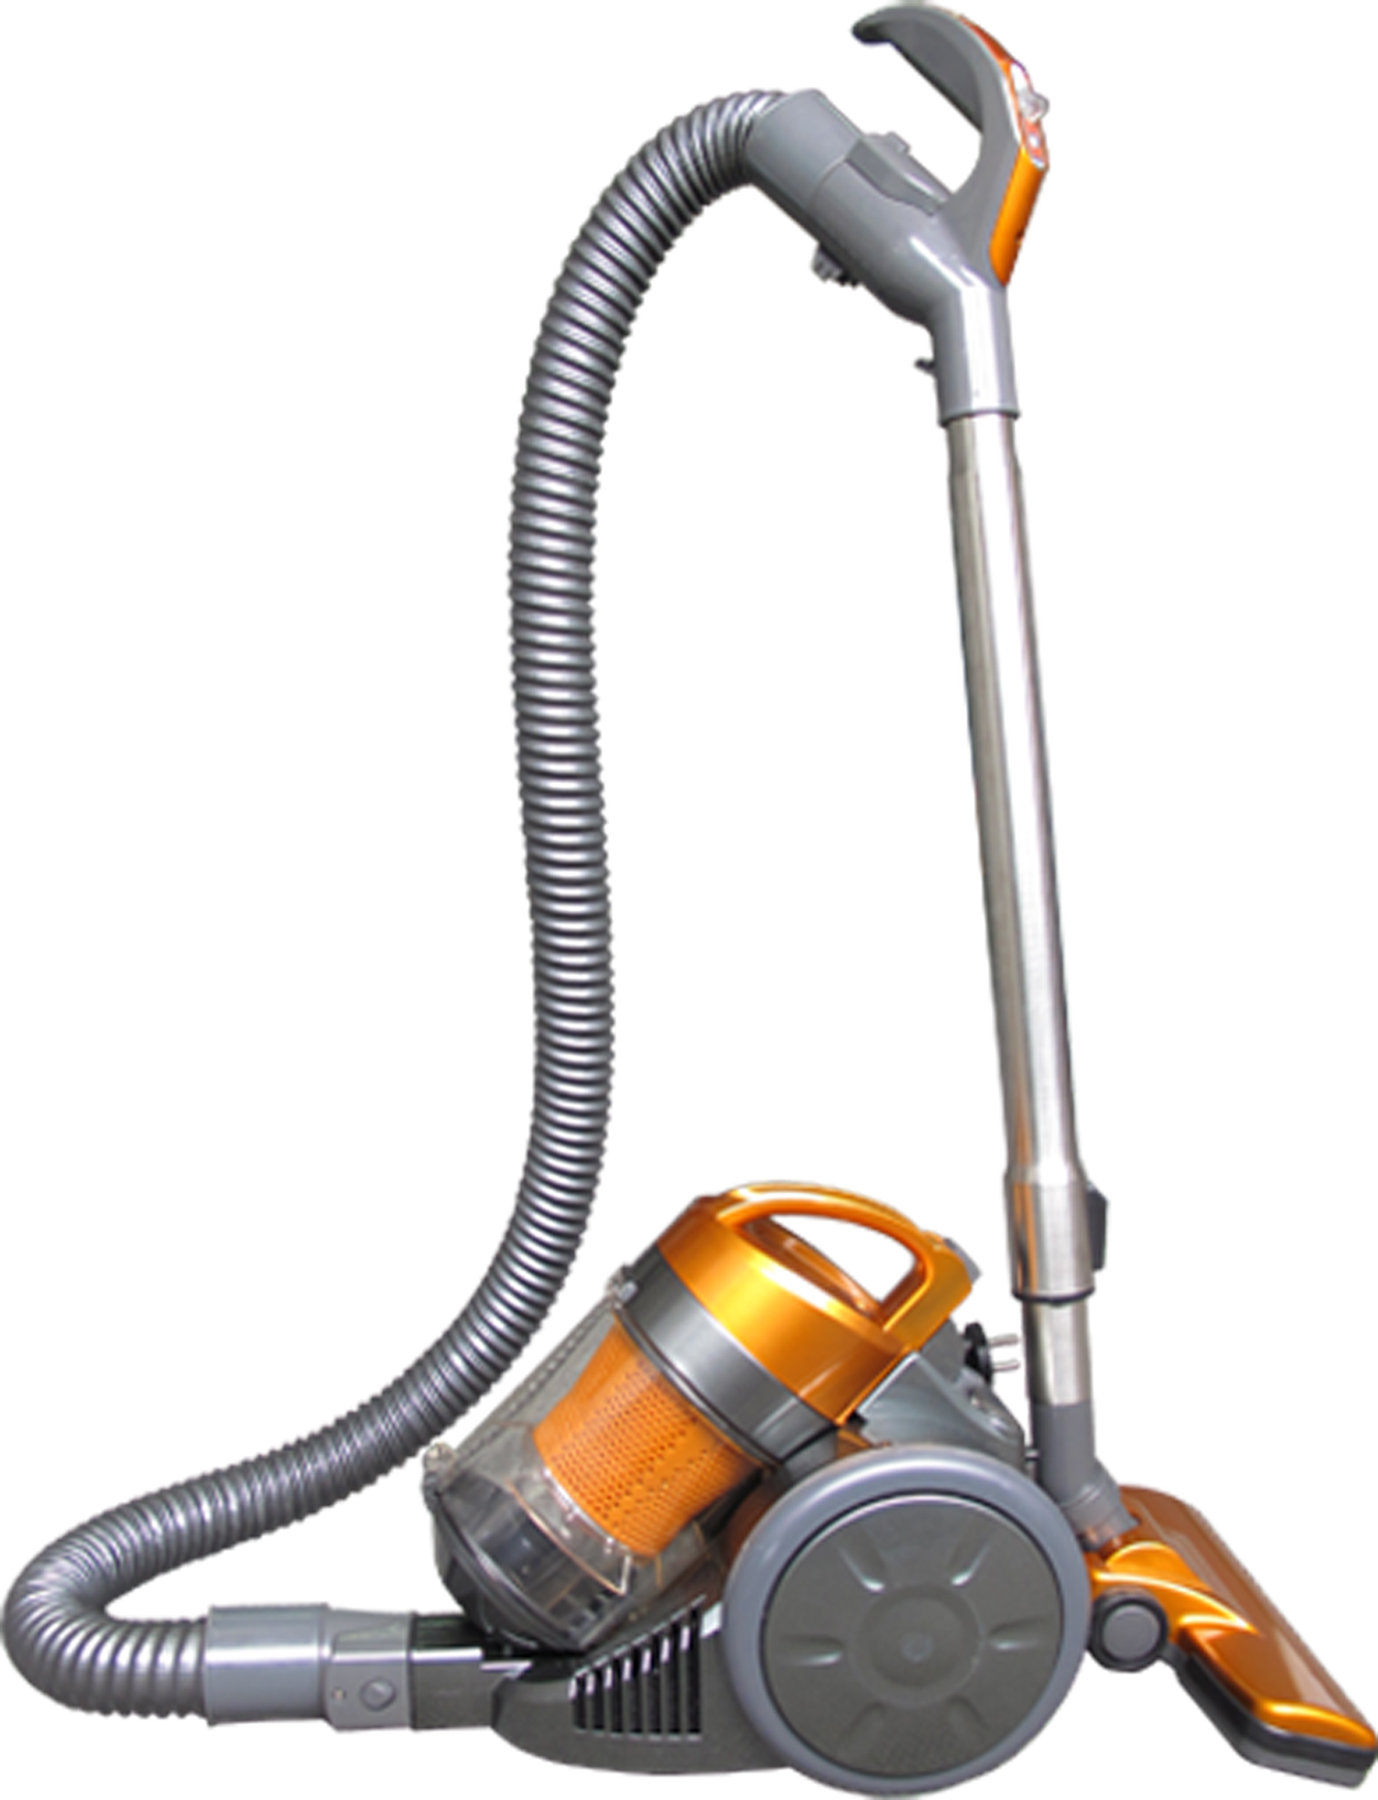 Dv-7488 V6,No Loss of Suction Multi-Cyclone Vacuum Cleaner